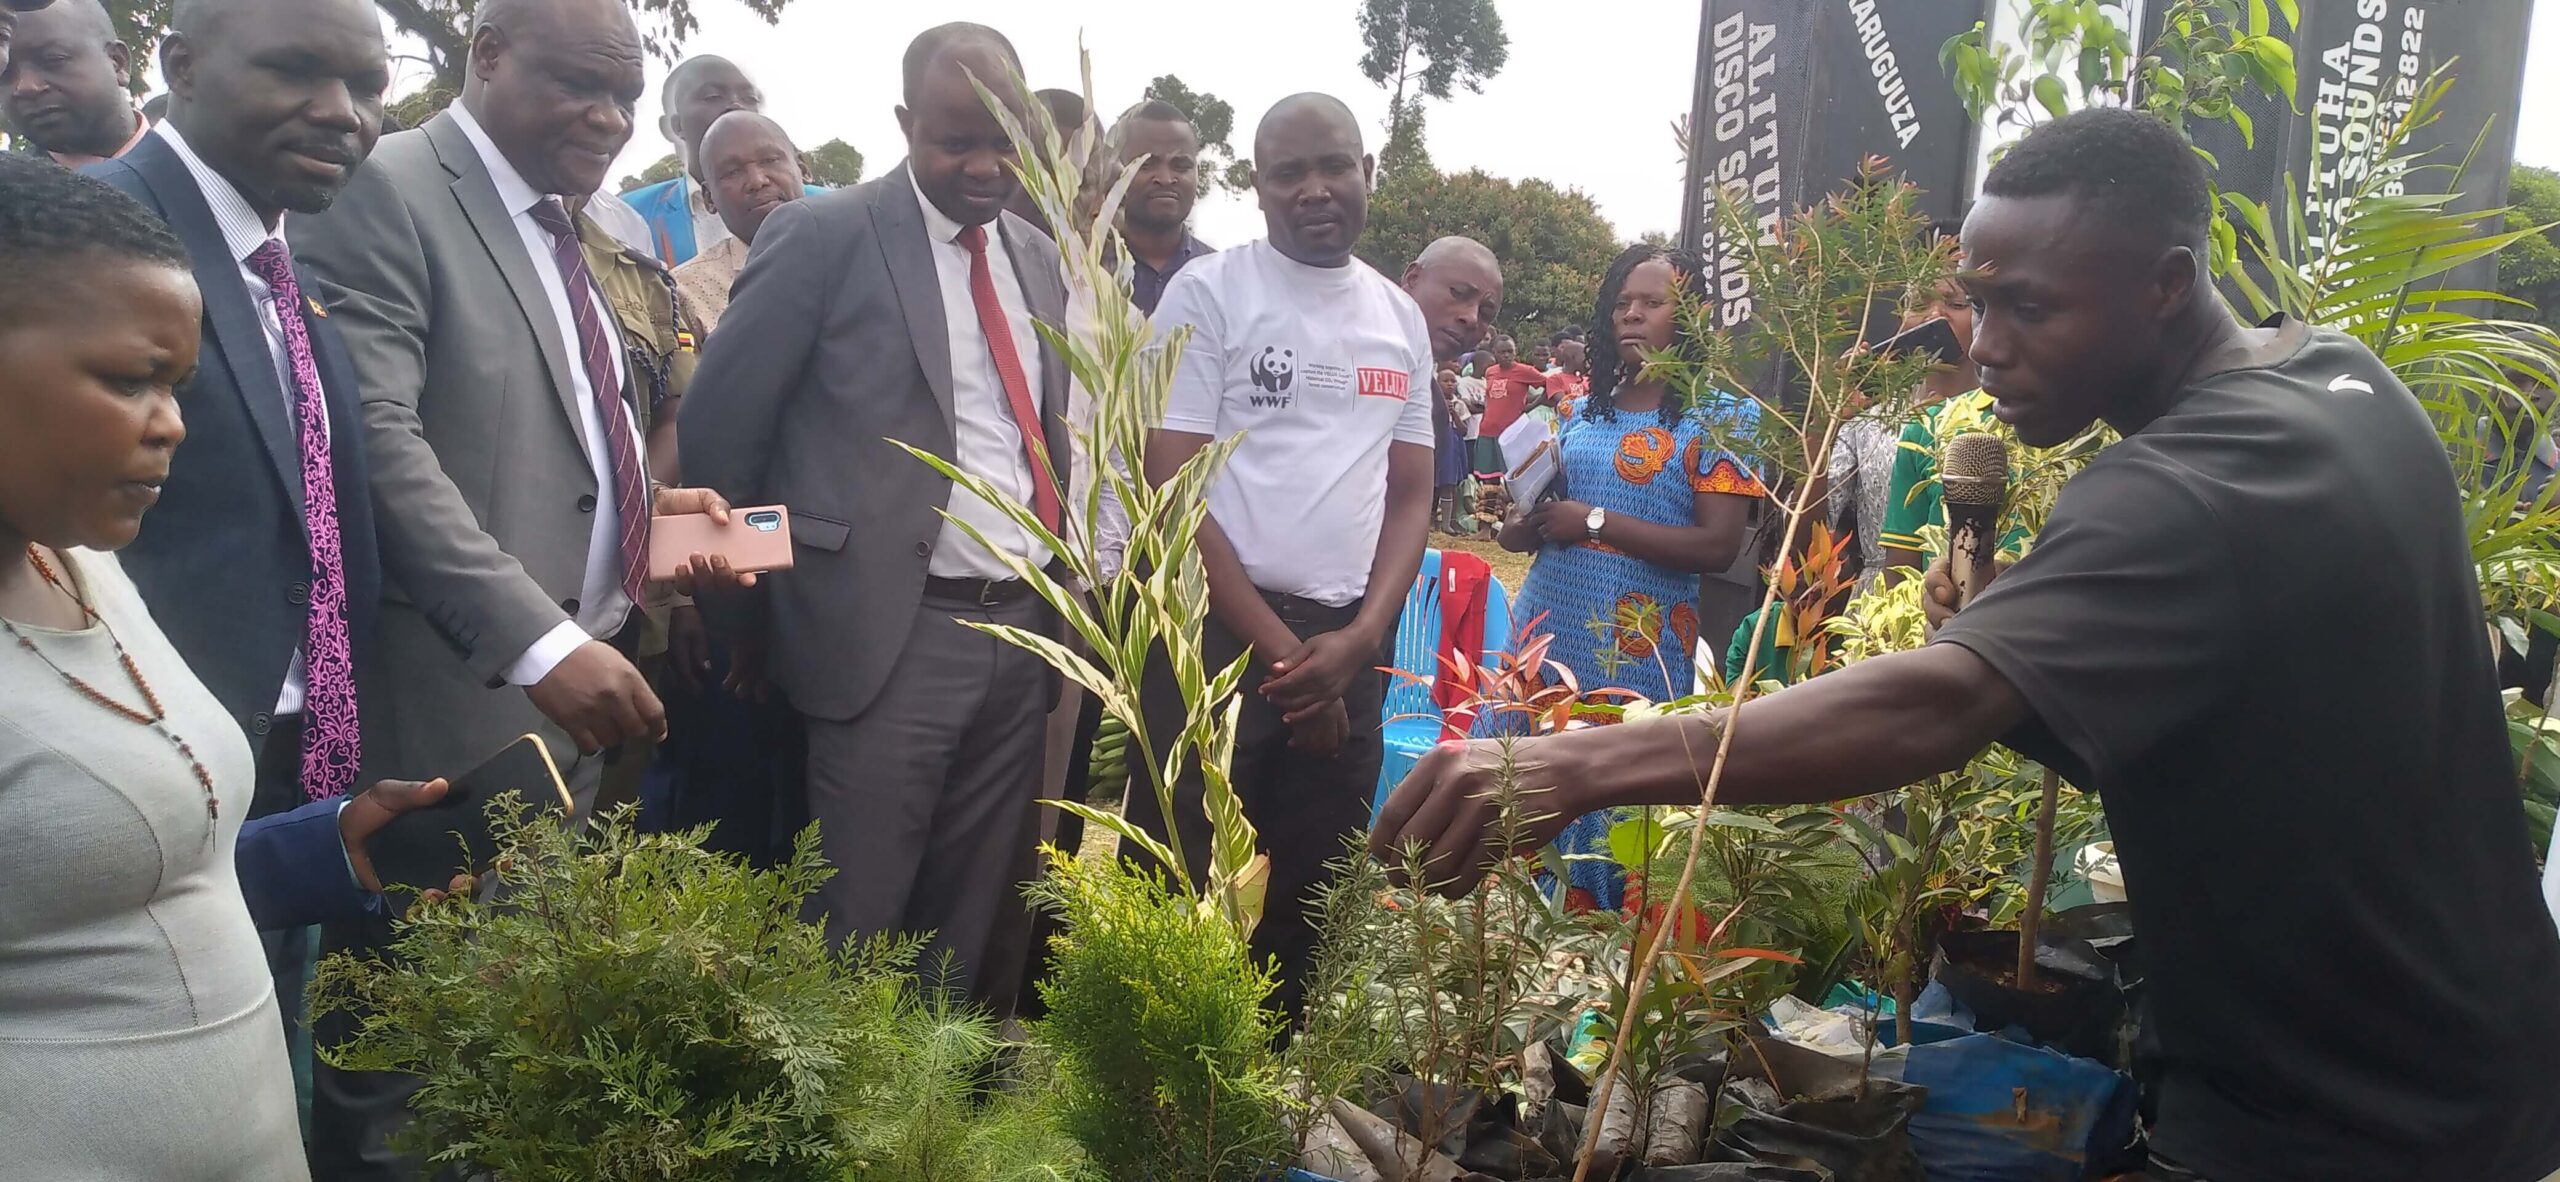 KCSON Together With Kibaale District Local Government Celebrates World Environmental Day